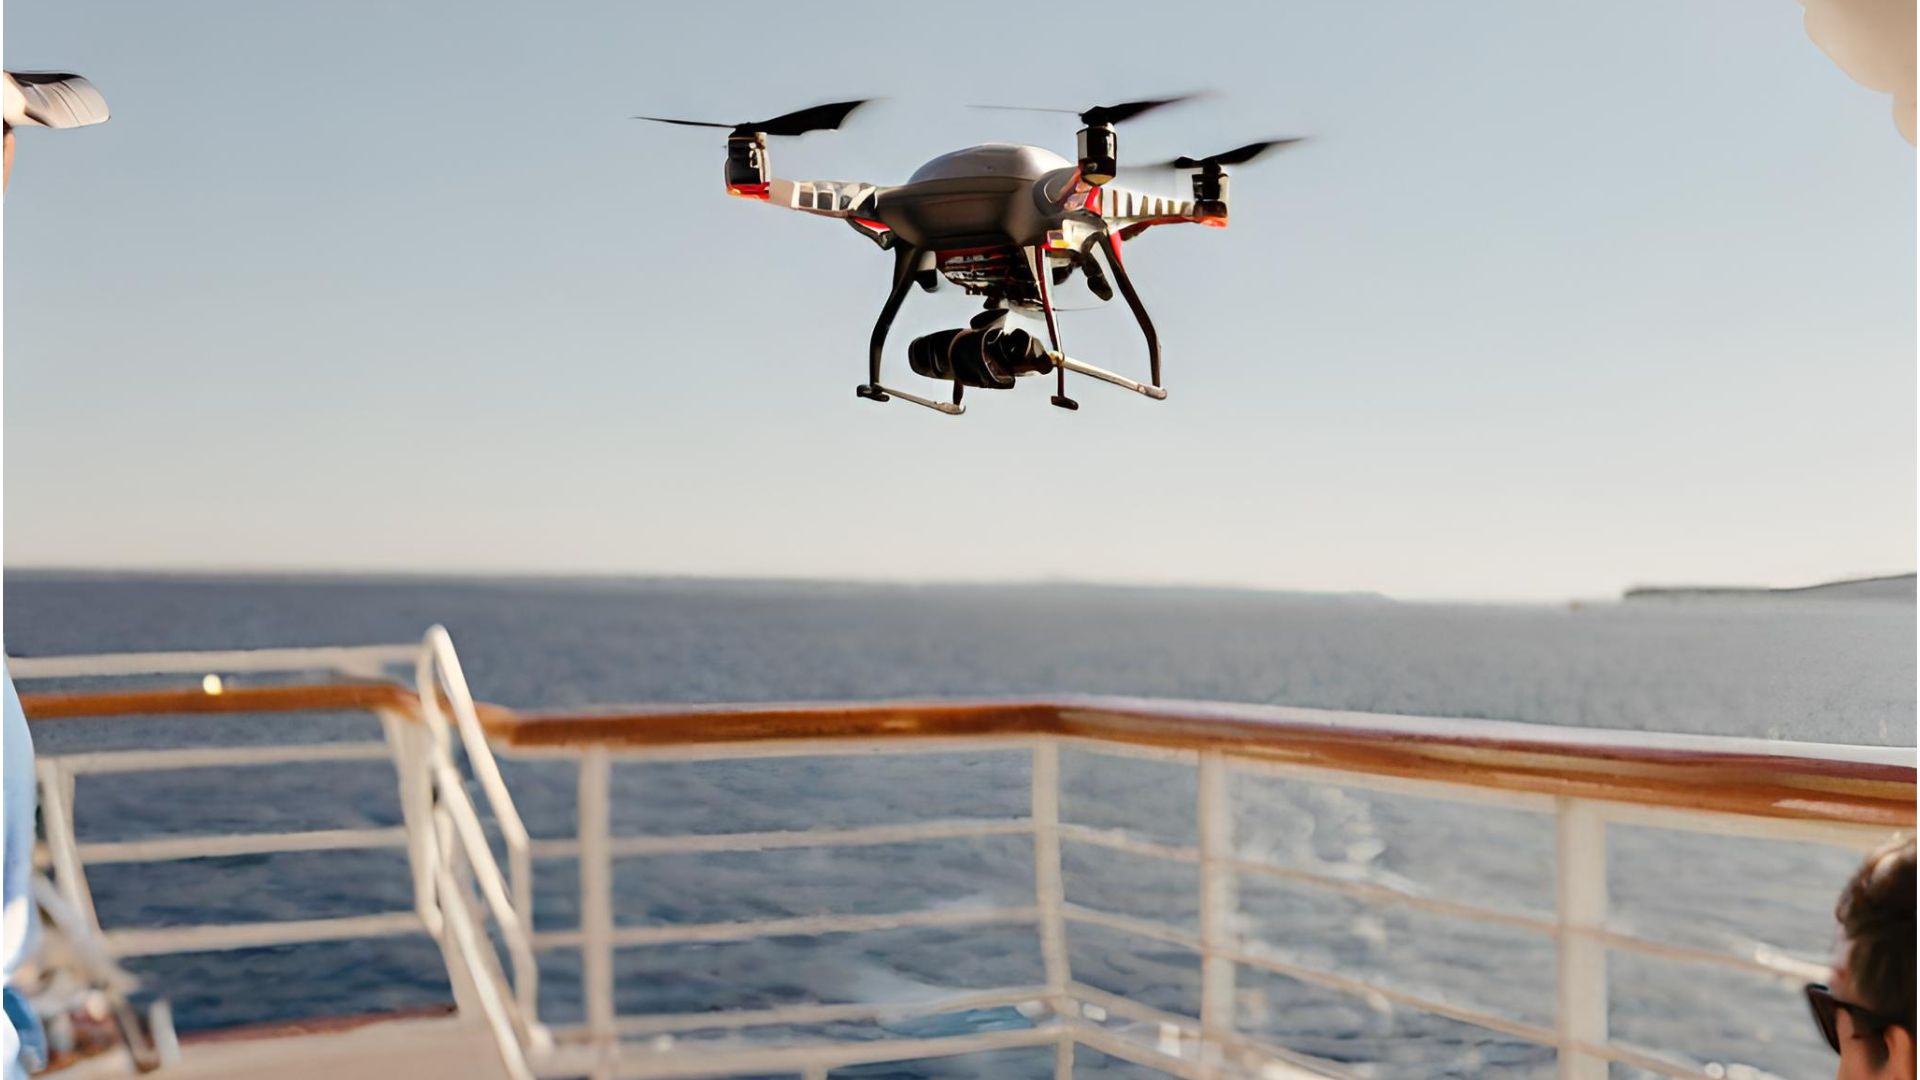 Bringing a Drone on a Cruise Ship